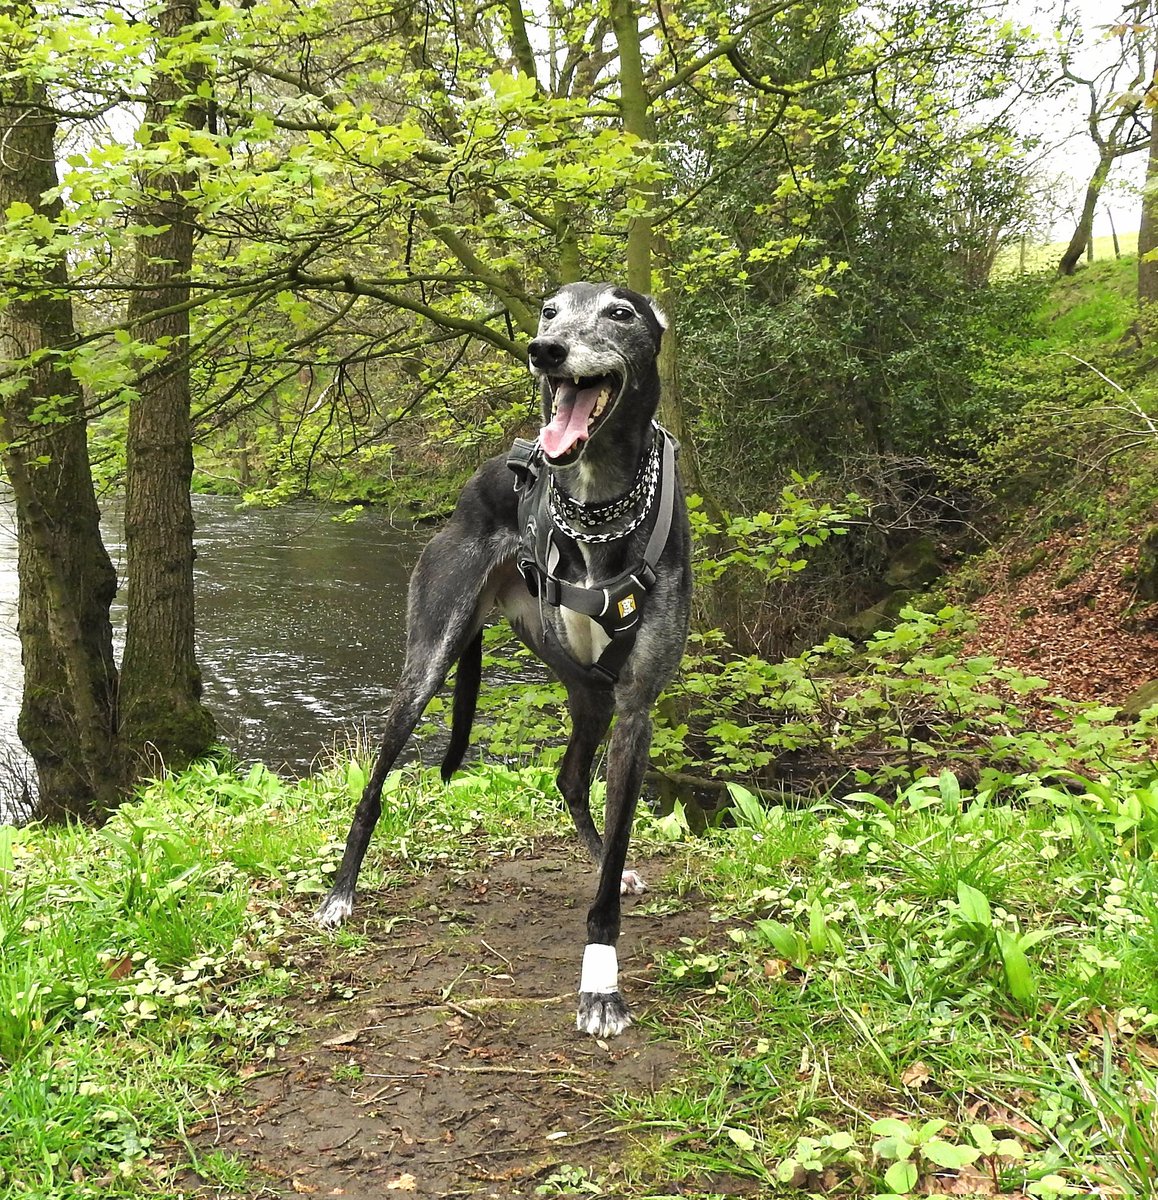 🌿🐾💚Rio in the spring green
countryside.💚🐾🌿
#GreyhoundsMakeGreatPets #GreyhoundsMakeGreytPets #PetsNotBets